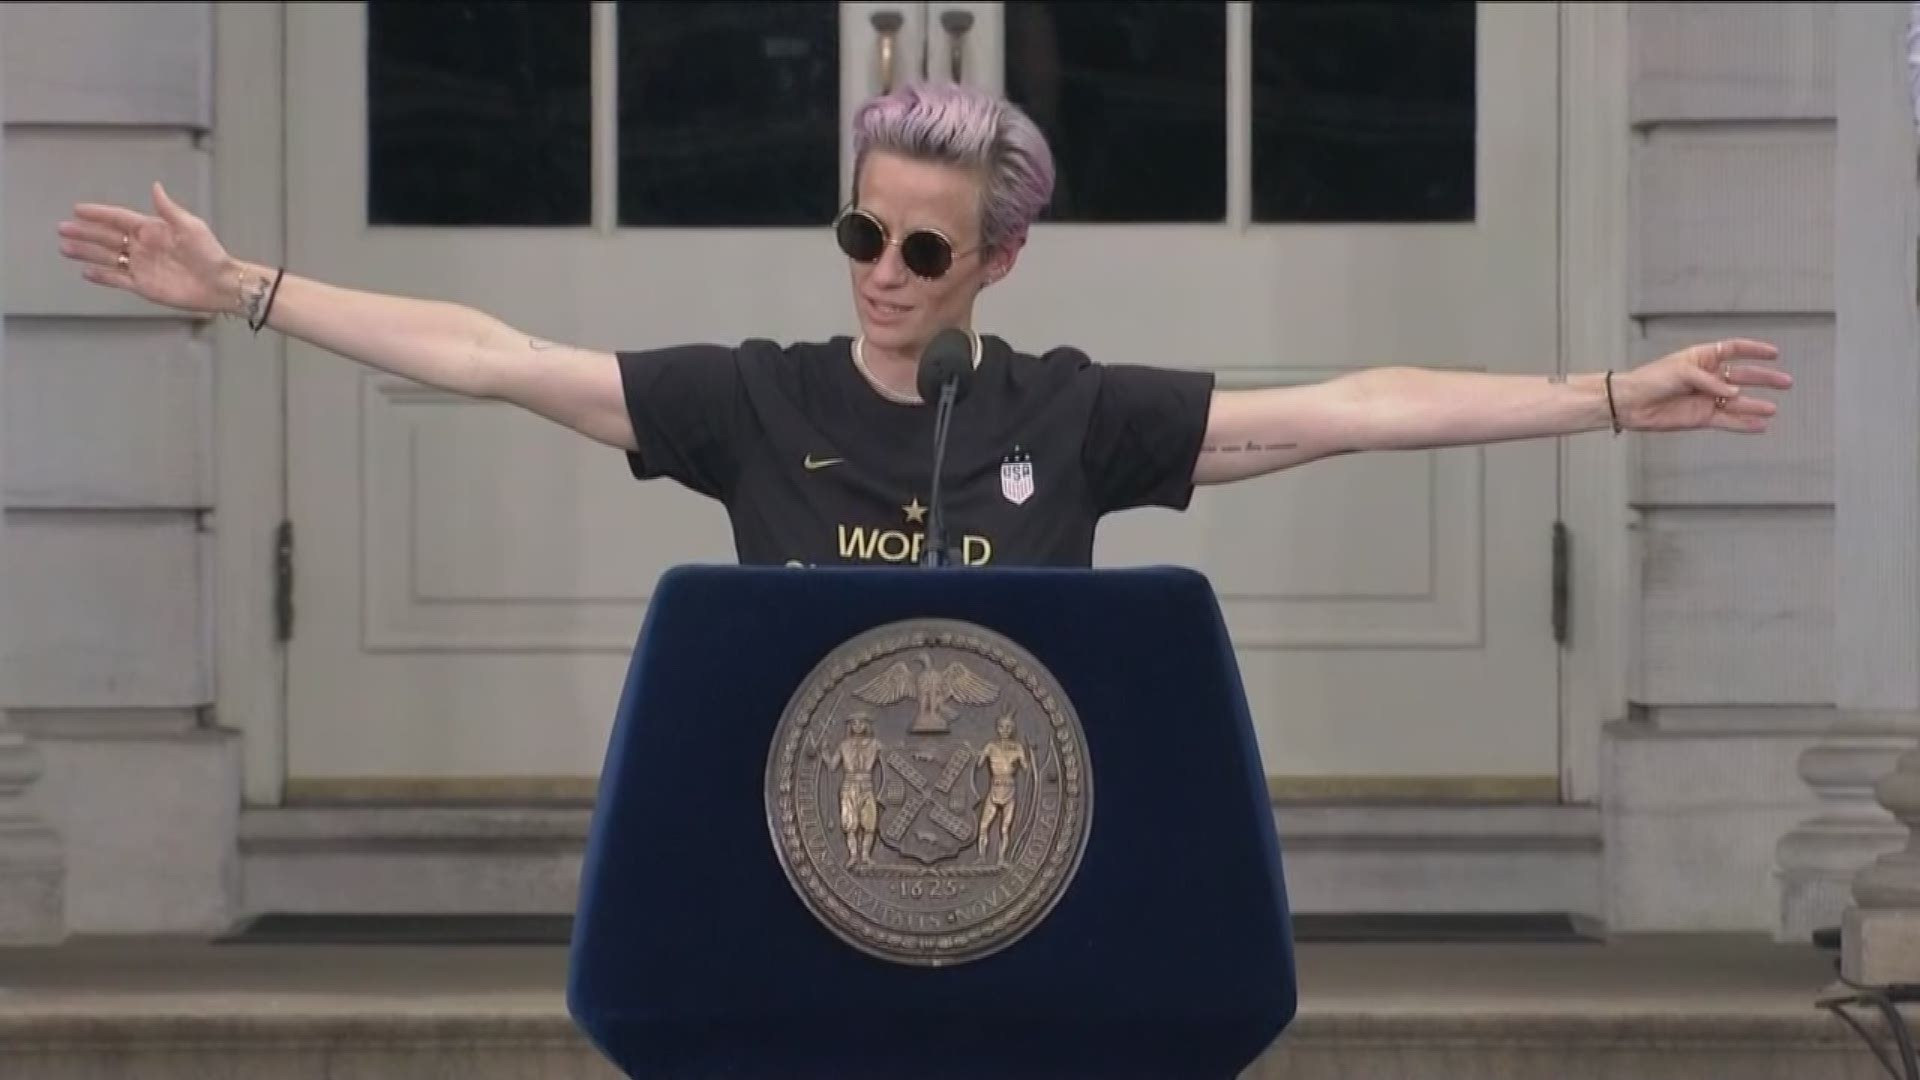 Team USA co-captain Megan Rapinoe spoke about the diversity of her World Cup champion team during a rally in New York City Wednesday.